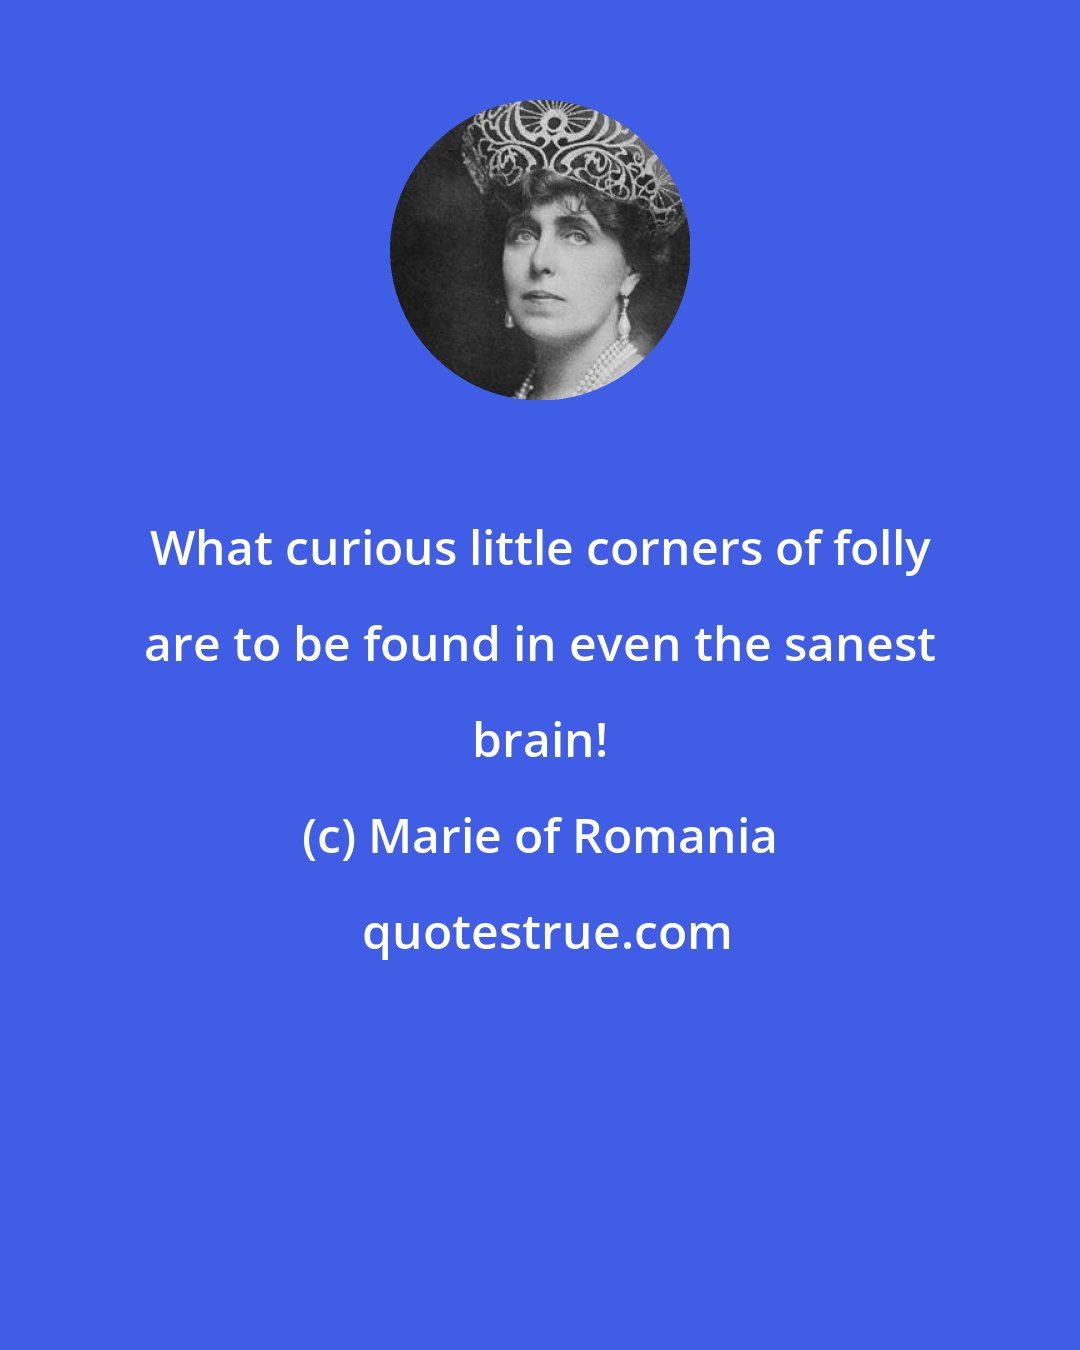 Marie of Romania: What curious little corners of folly are to be found in even the sanest brain!